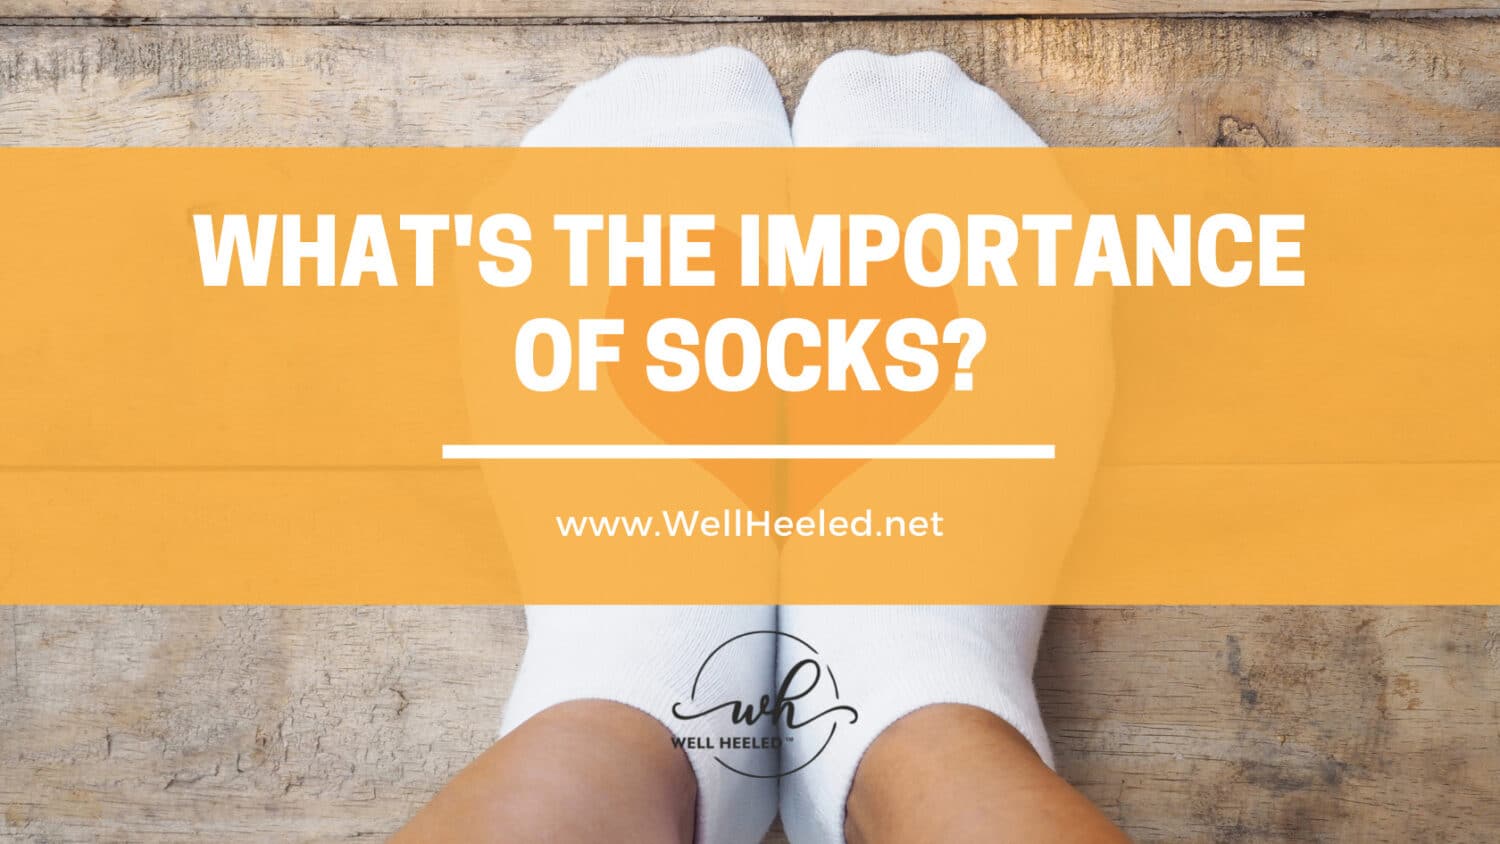 Whats the importance of socks